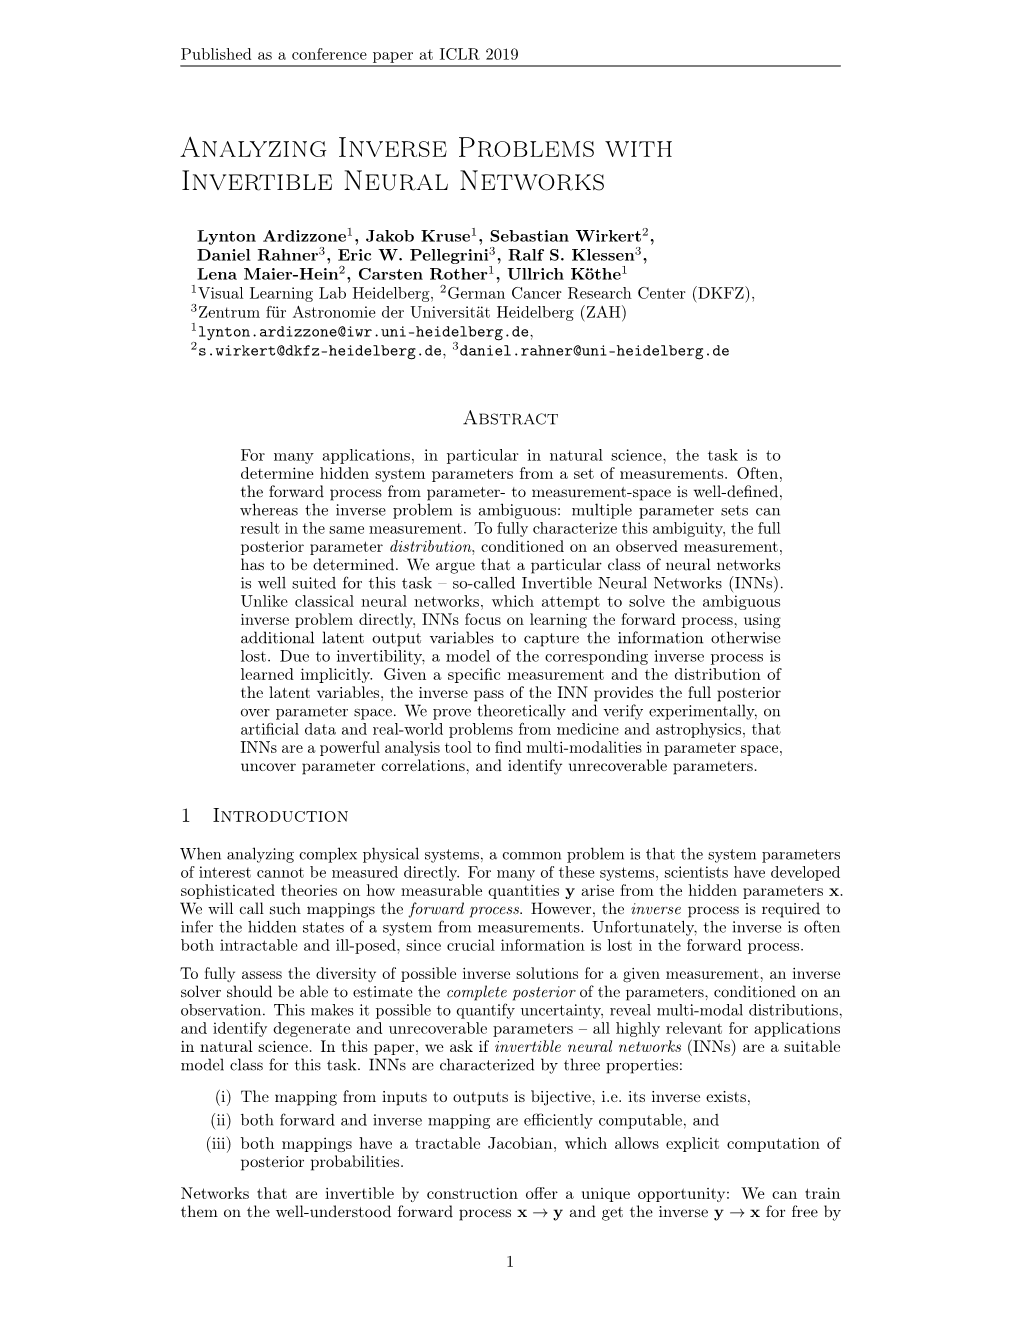 Analyzing Inverse Problems with Invertible Neural Networks